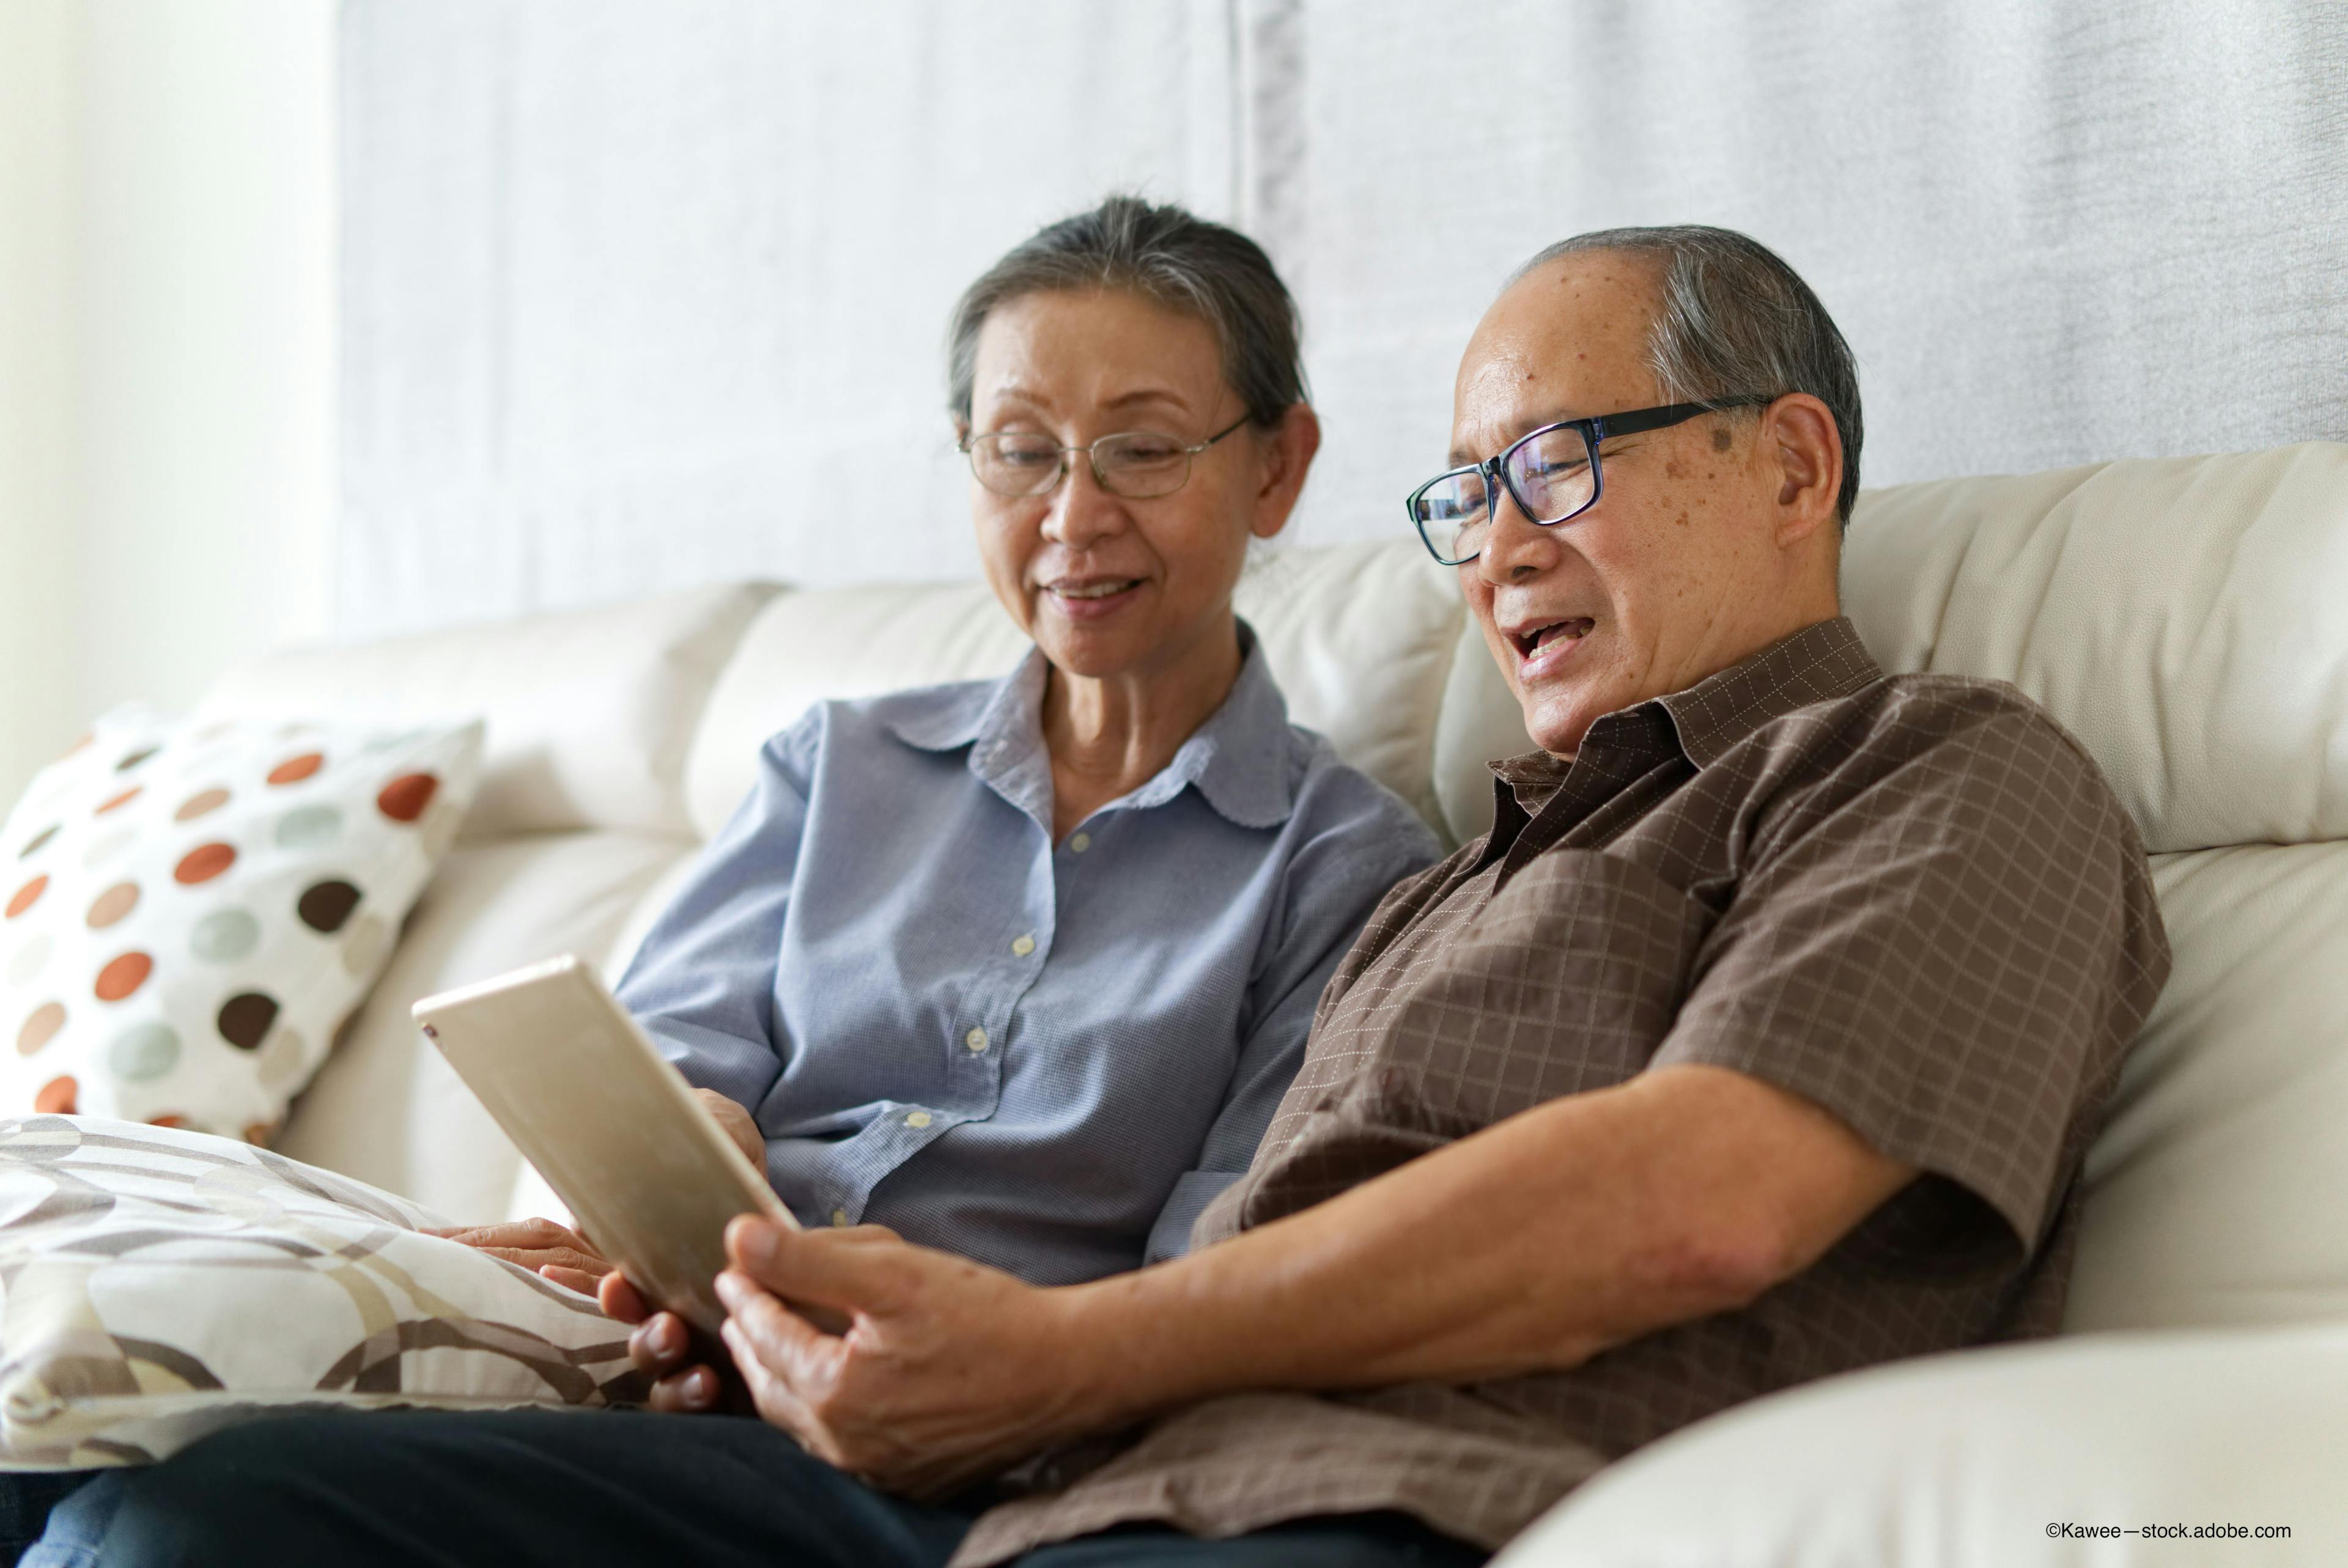 elderly couple learning about glaucoma on tablet via free resources provided by Prevent Blindness - Image credit: Adobe Stock / Kawee